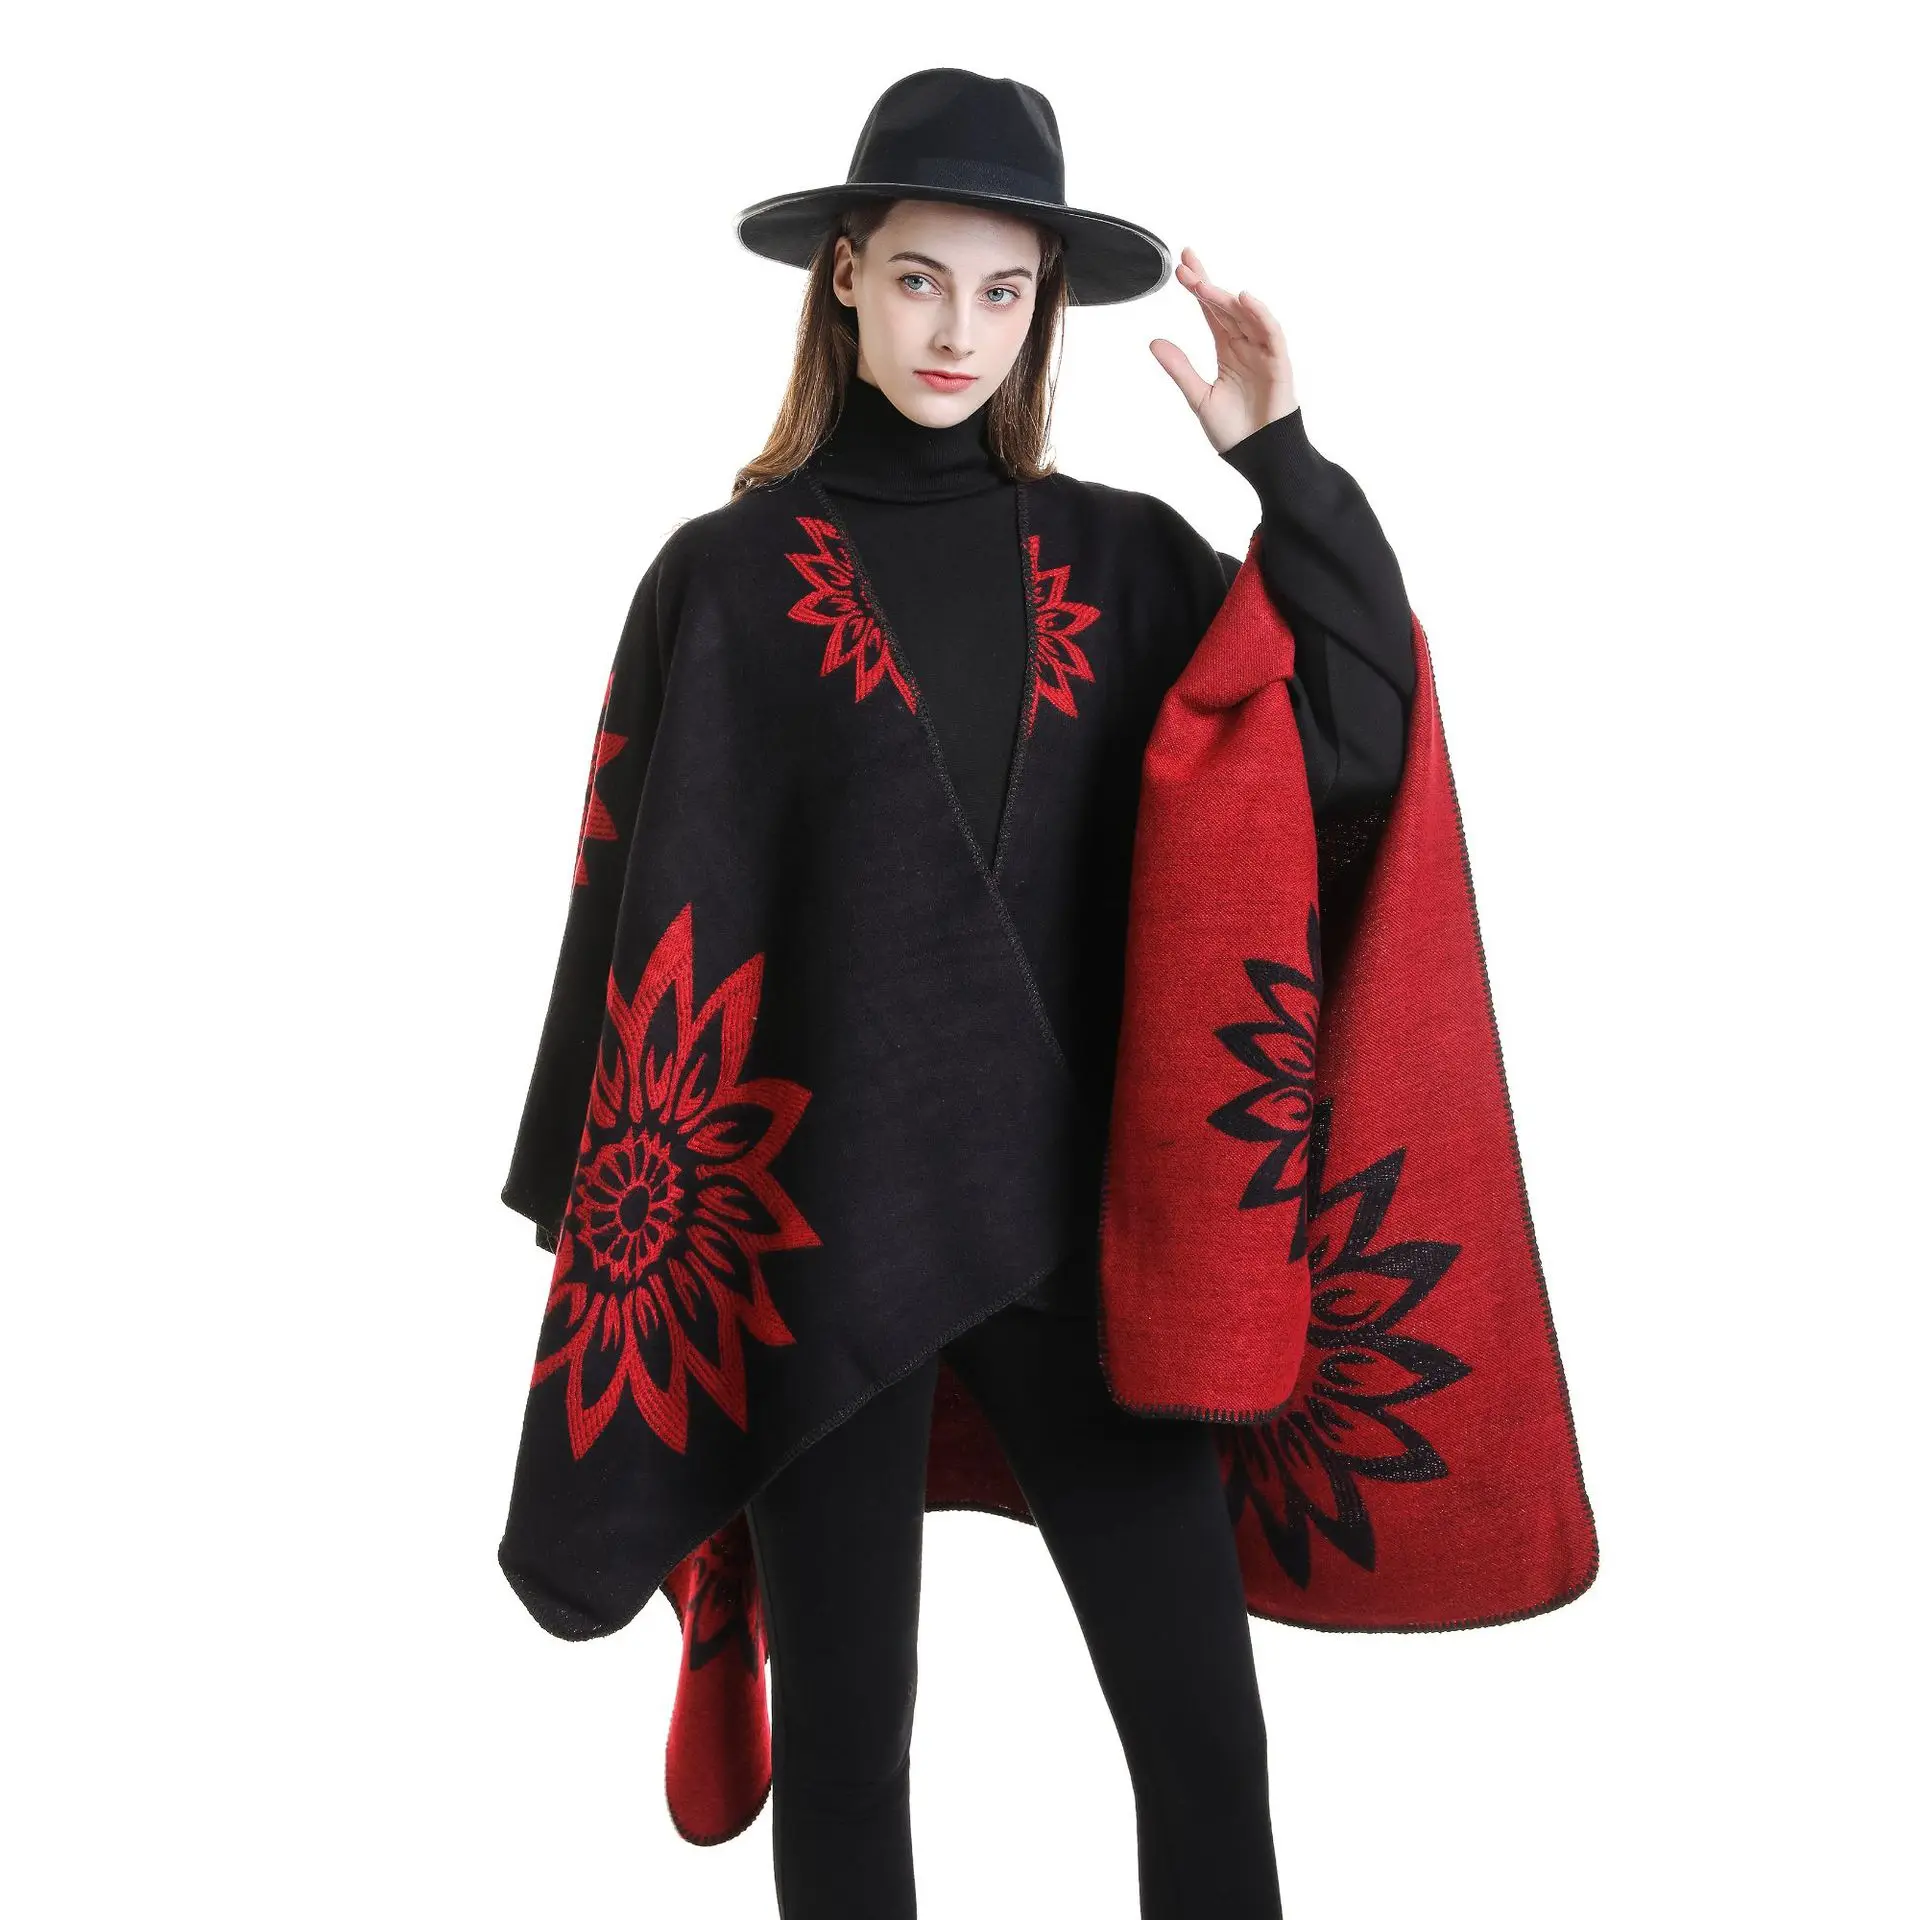 Women Cashmere Feel Shawl Lady Double-sided Winter Cape Spring Autumn Retro Cardigan Sunflowers Cloak Soft Large Blanket New in 30sheets per pack material paper book double sided spring flower field retro hand account writing decorative note book 8 types